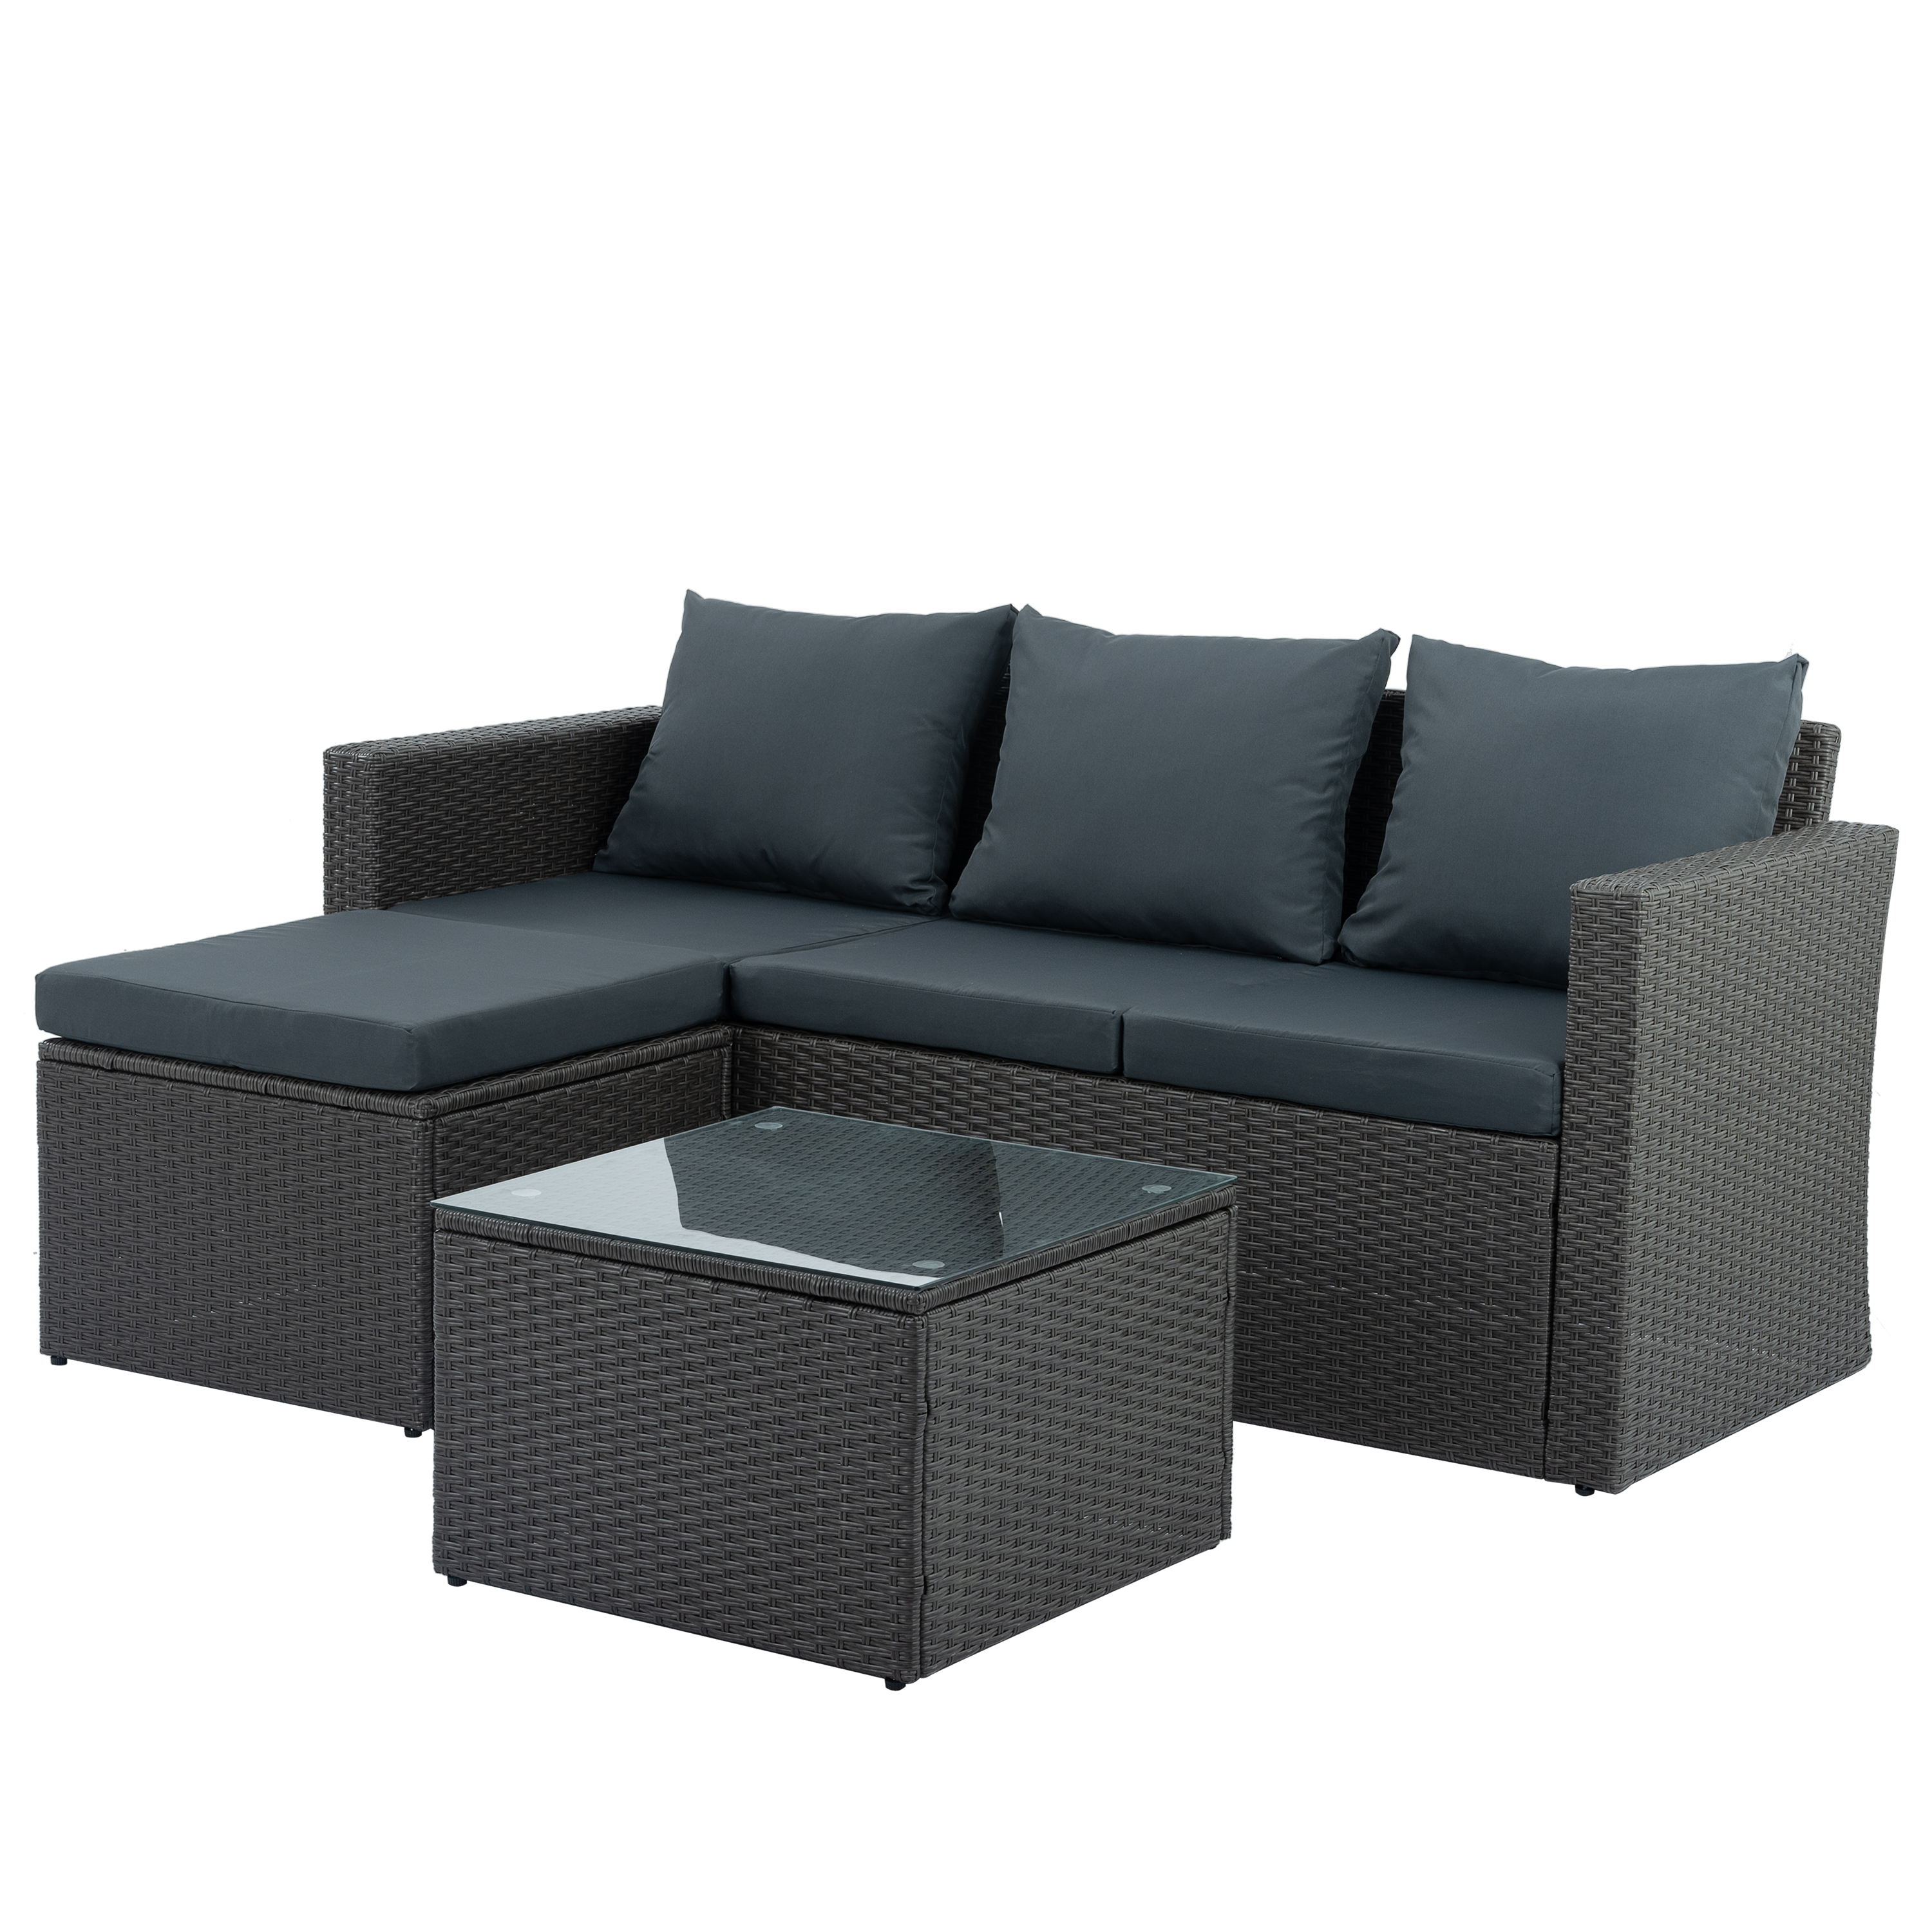 Rattan Patio Sofa Set, 3 Pieces Outdoor Sectional Furniture, All-Weather PE Rattan Wicker Patio Conversation, Cushioned Sofa with Glass Table & Ottoman for Patio Garden Poolside Deck - image 5 of 10